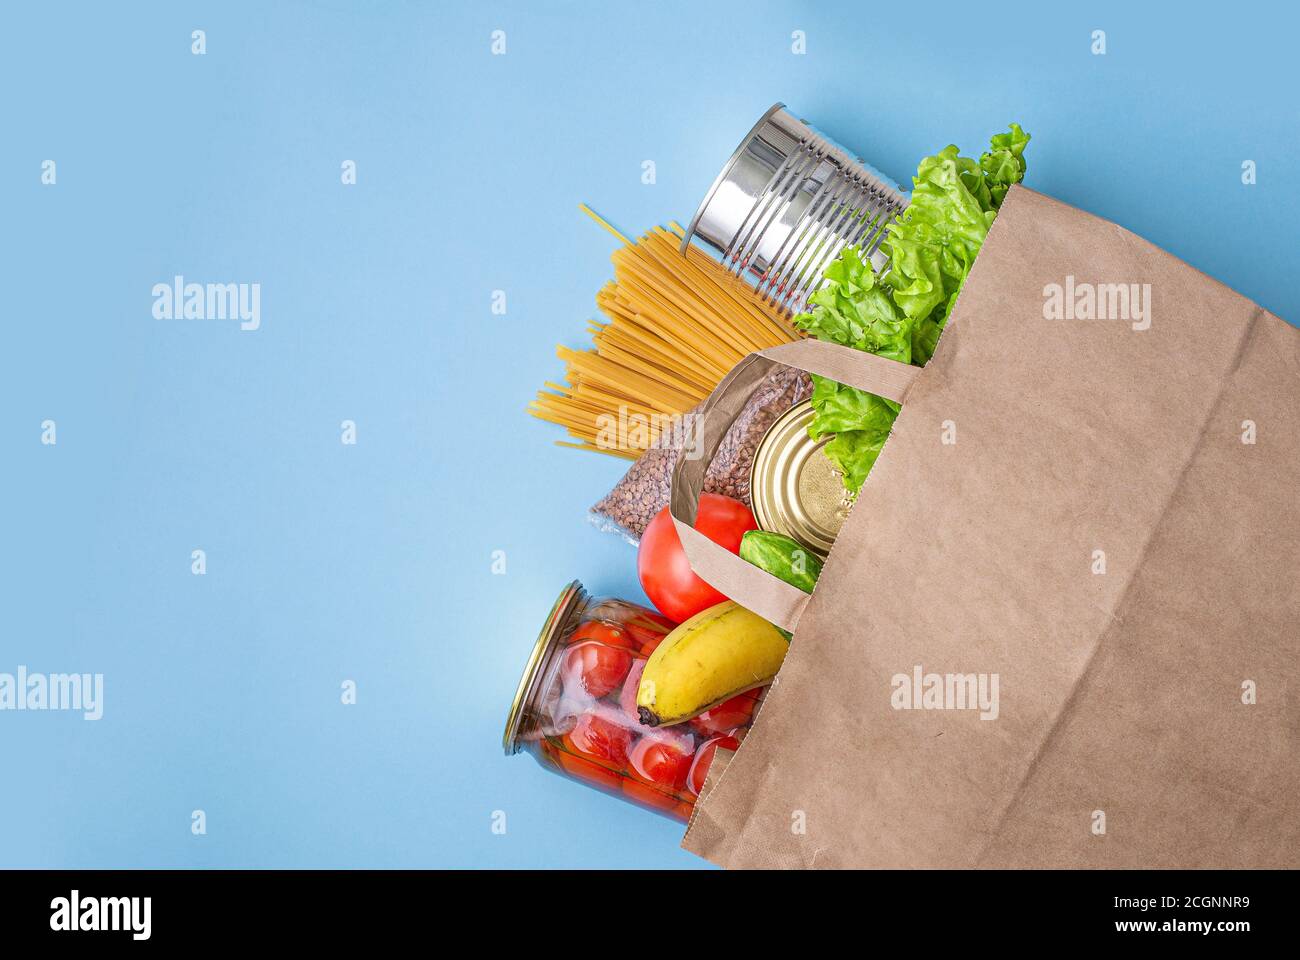 Paper bag with food, canned food, tomatoes, cucumbers, bananas on a yellow background. Donation, coronavirus quarantine. Food supplies for quarantine. Stock Photo